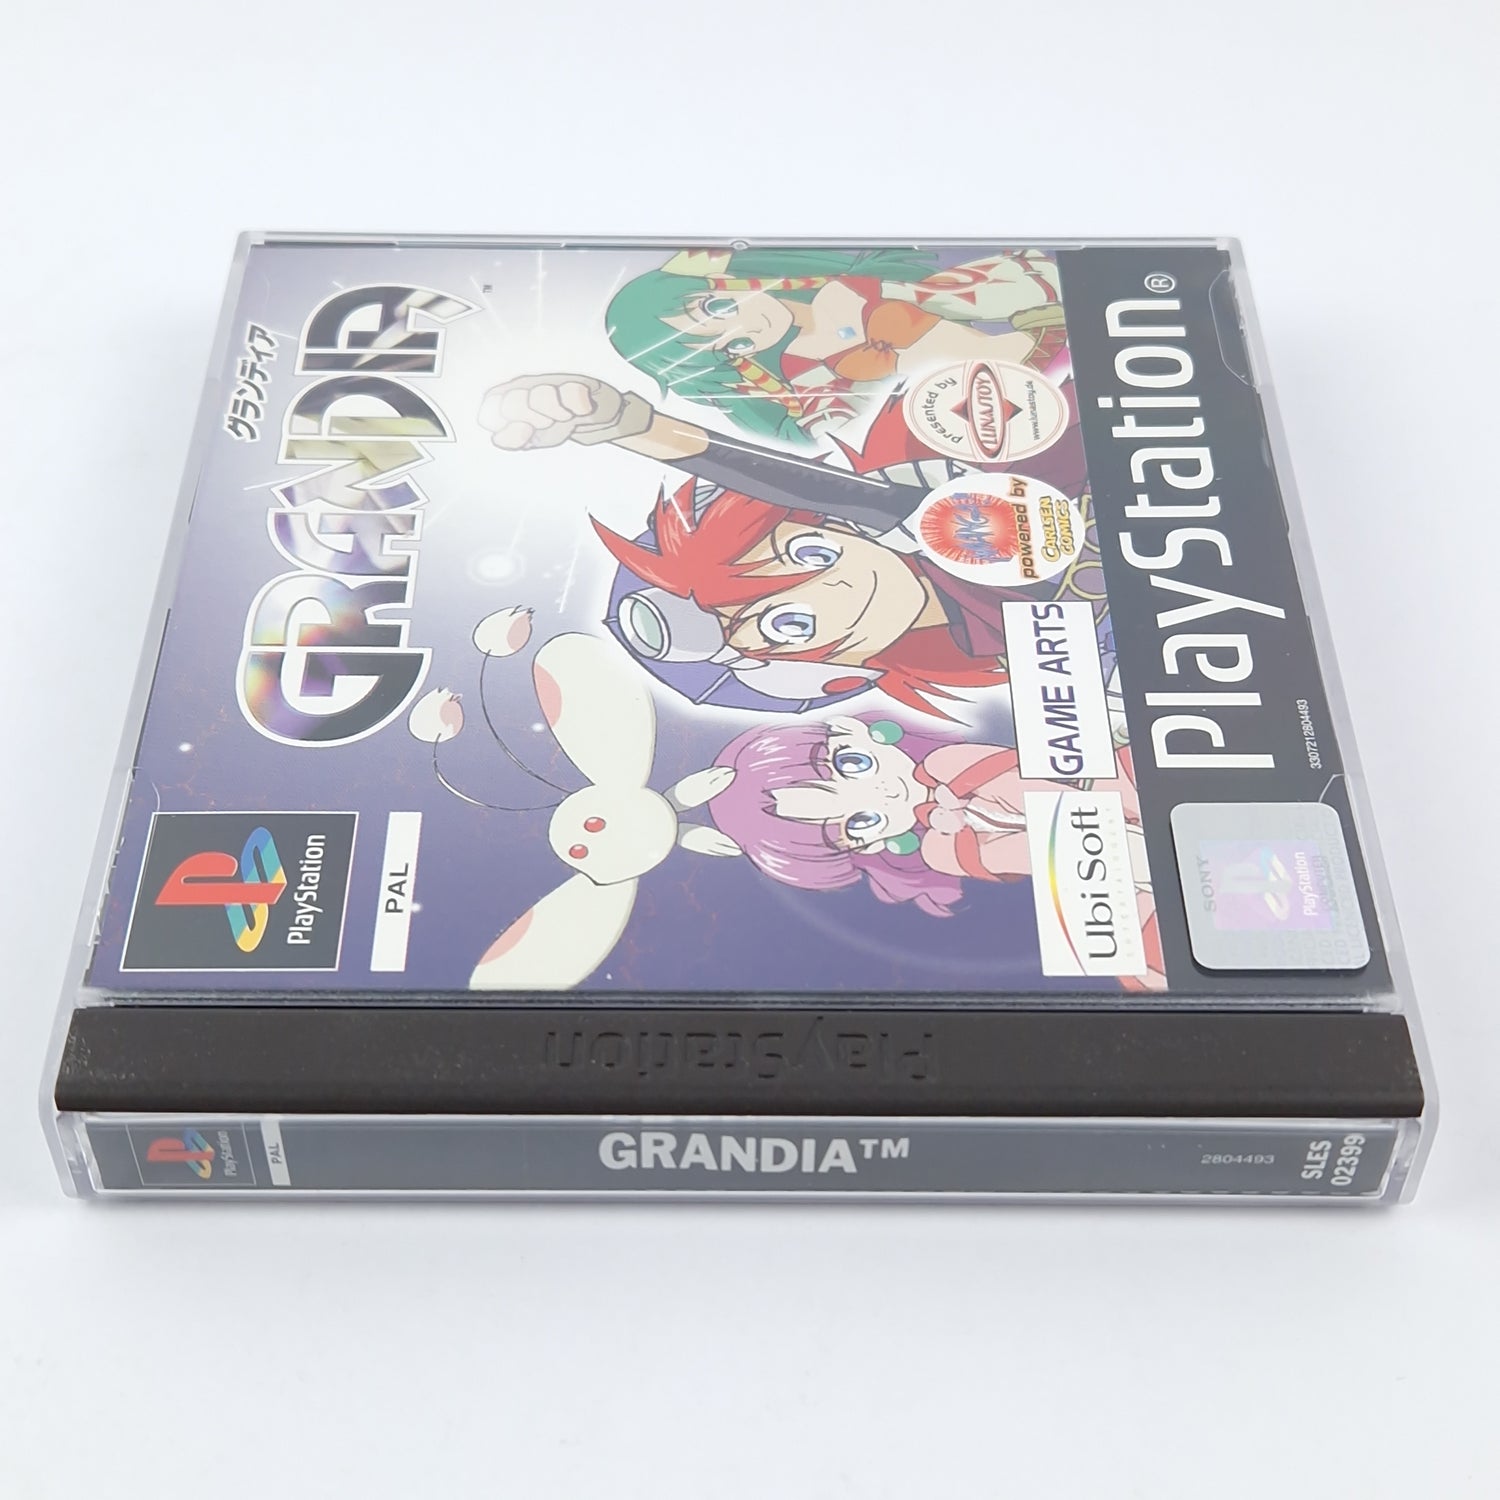 Playstation 1 Game: Grandia + Strategy Guide - OVP PAL / SONY PS1 PsOne